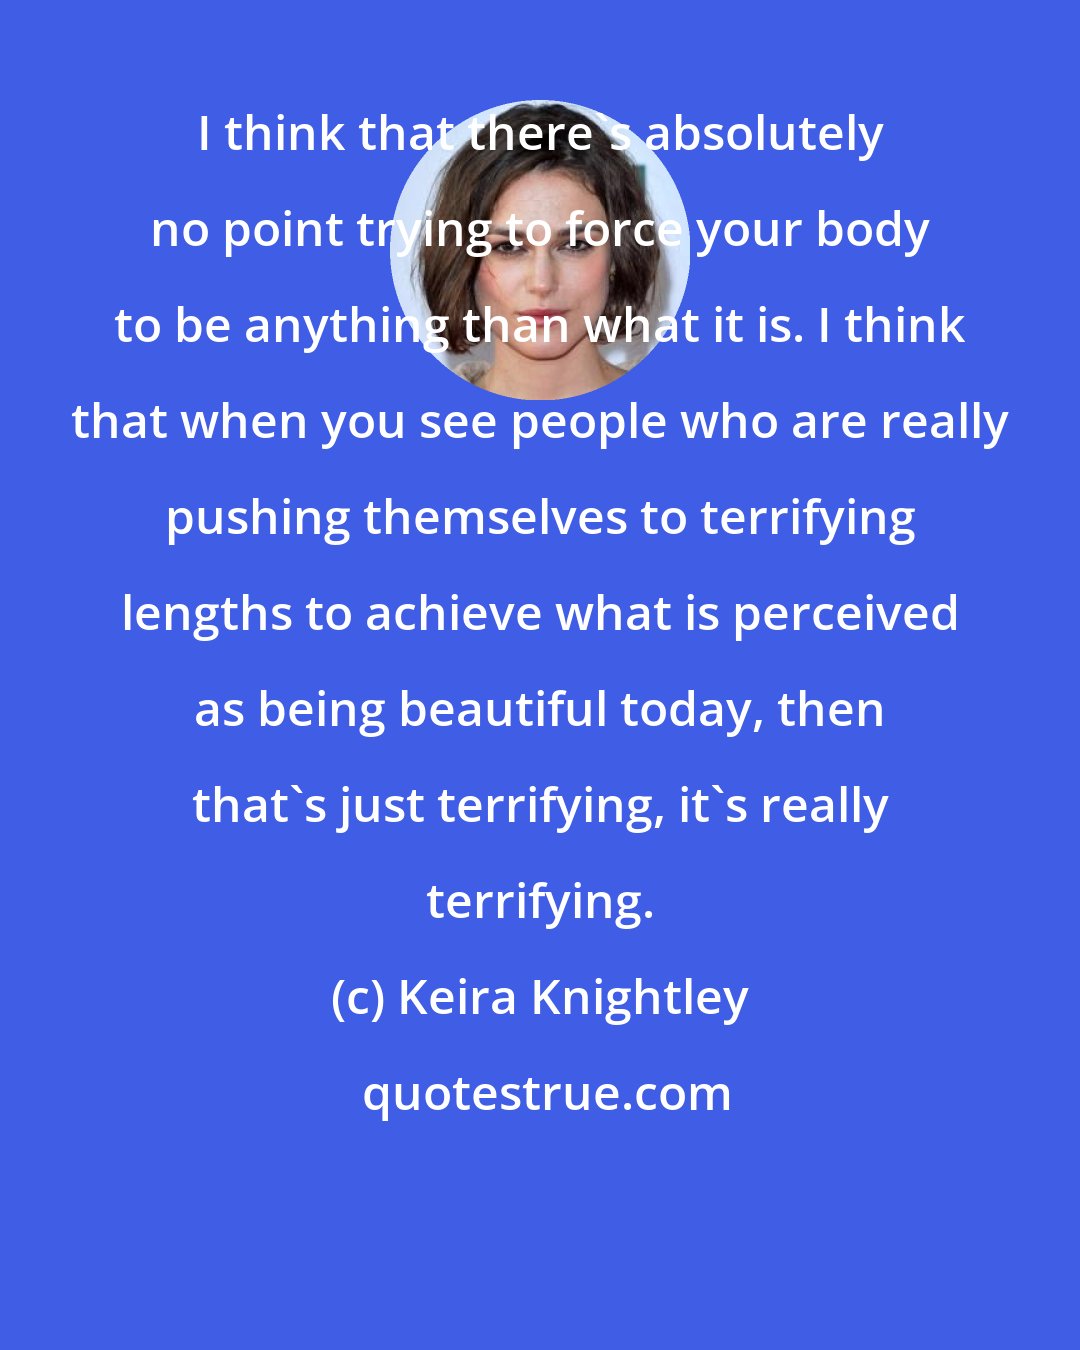 Keira Knightley: I think that there's absolutely no point trying to force your body to be anything than what it is. I think that when you see people who are really pushing themselves to terrifying lengths to achieve what is perceived as being beautiful today, then that's just terrifying, it's really terrifying.